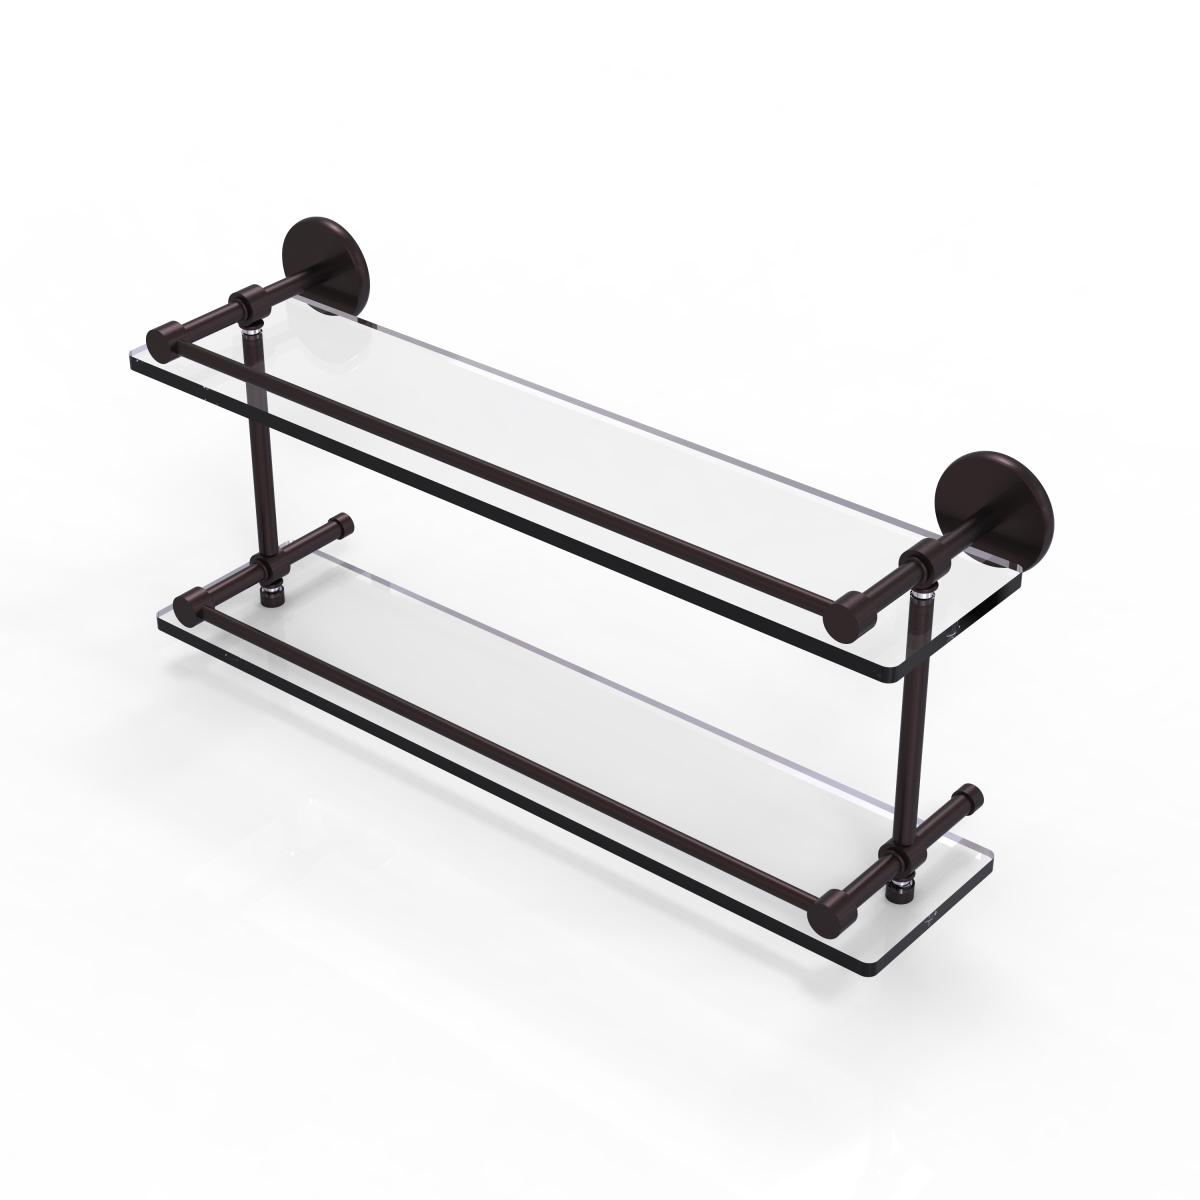 Allied Brass P1000-2-22-GAL-ABZ 22 in. Tempered Double Glass Shelf with Gallery Rail, Antique Bronze